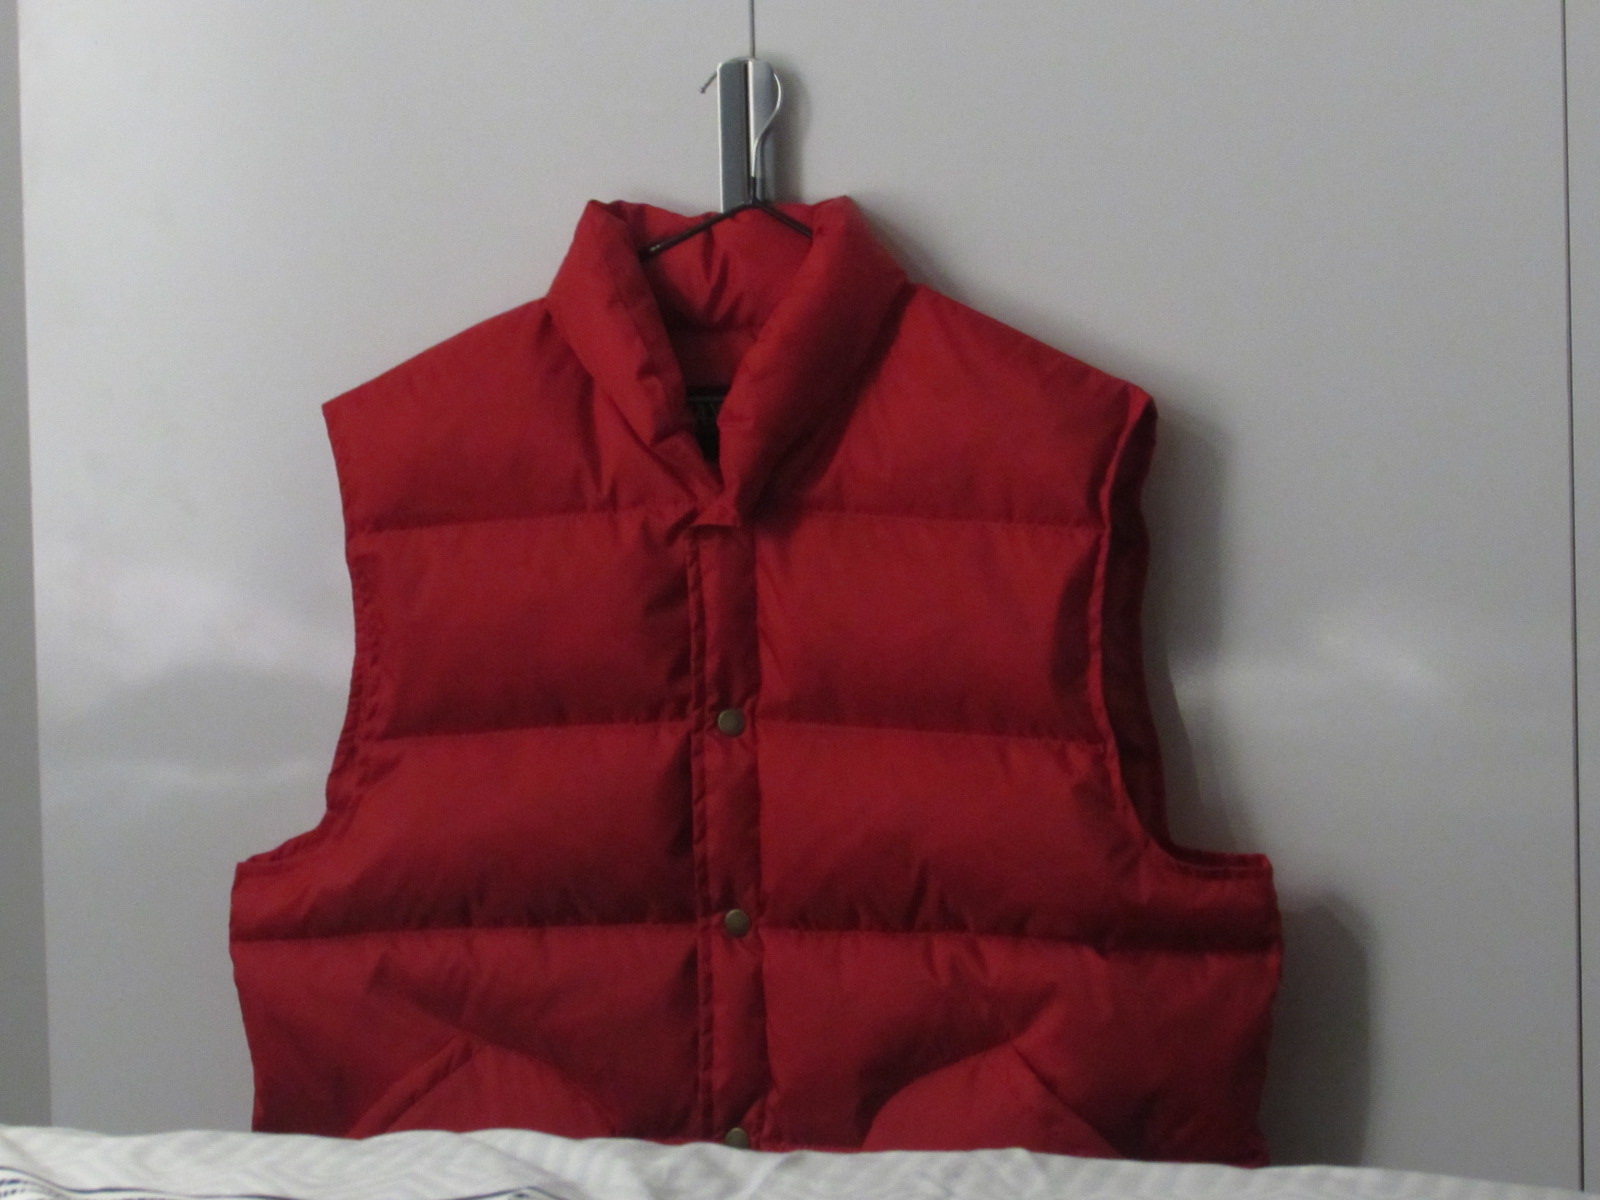 Max Cady BTTF Vest - Advice needed | RPF Costume and Prop Maker Community